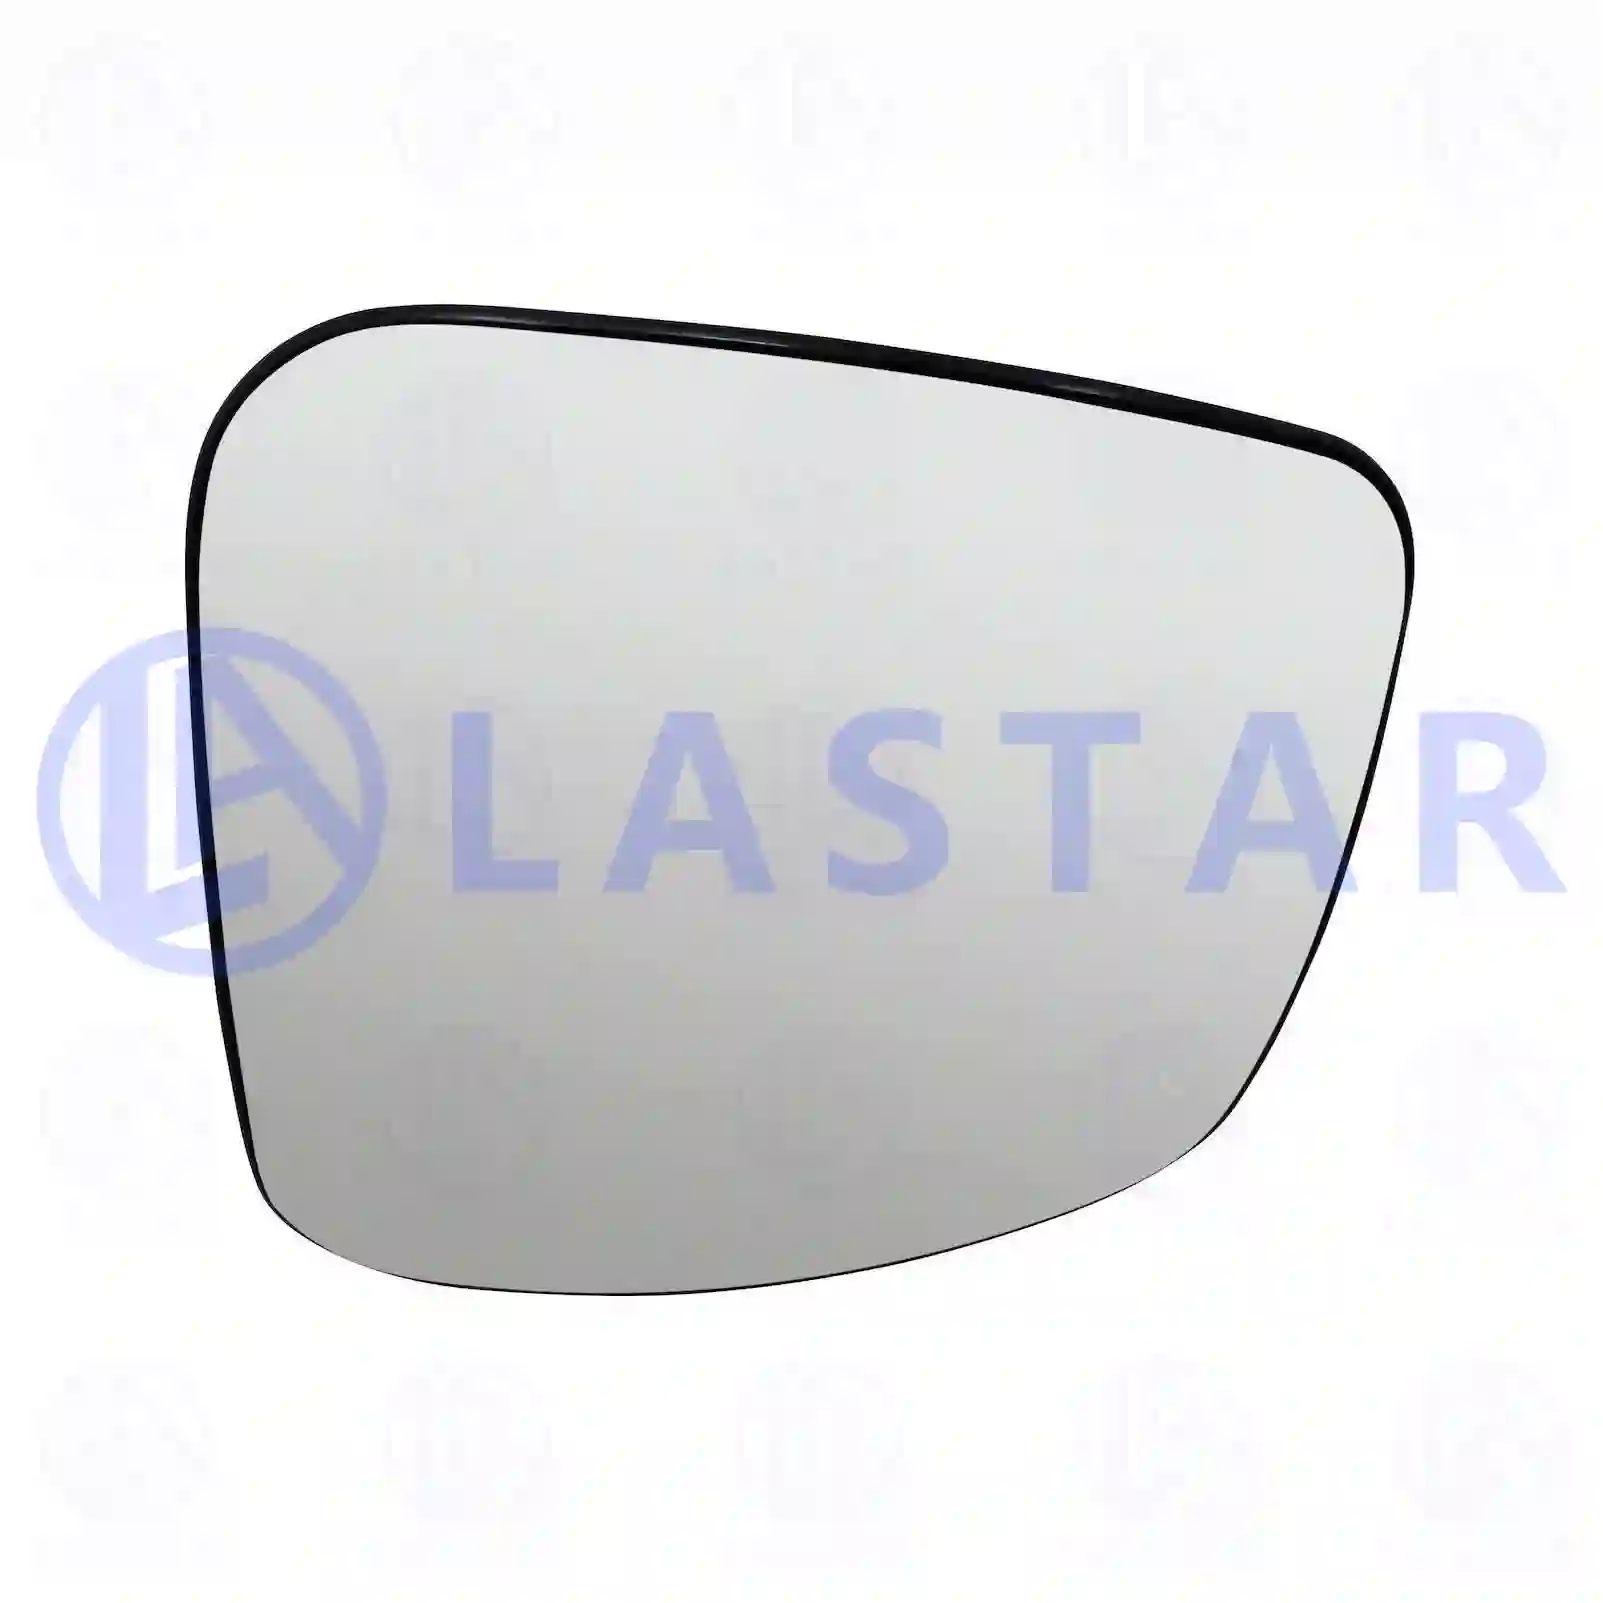 Mirror glass, wide view mirror, heated, 77720462, 504197879, ZG61021-0008 ||  77720462 Lastar Spare Part | Truck Spare Parts, Auotomotive Spare Parts Mirror glass, wide view mirror, heated, 77720462, 504197879, ZG61021-0008 ||  77720462 Lastar Spare Part | Truck Spare Parts, Auotomotive Spare Parts